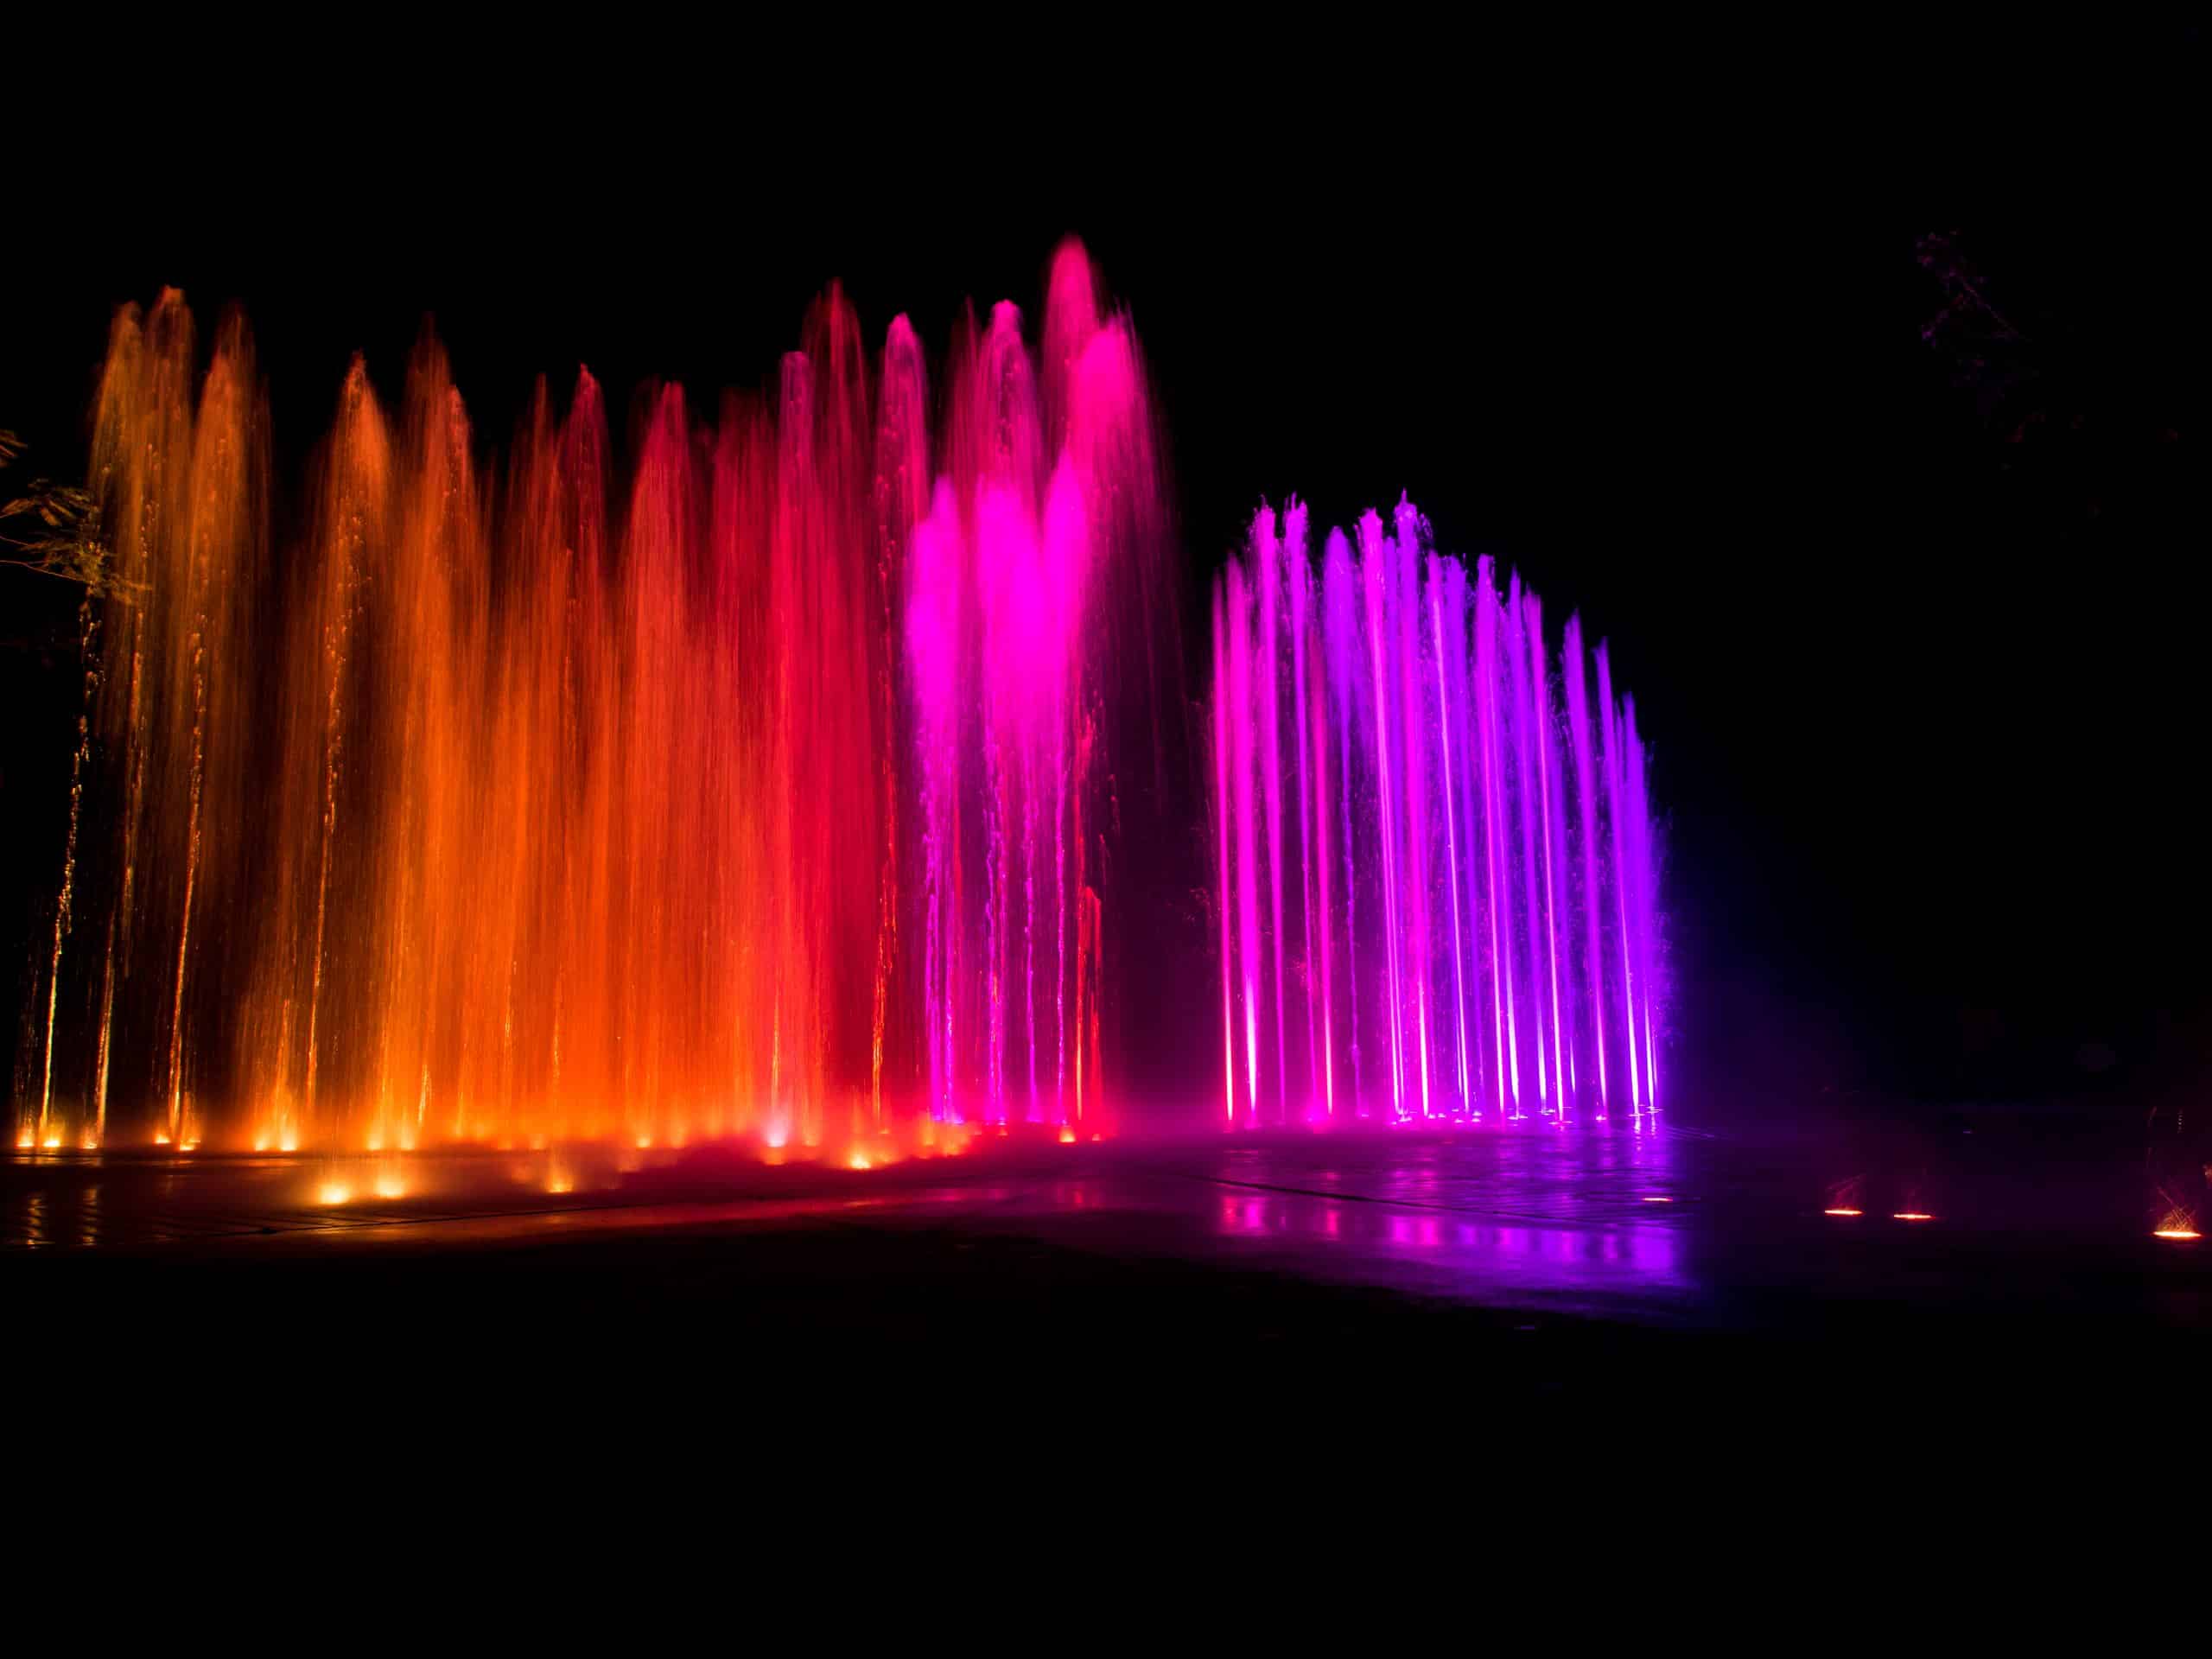 colored decorative dancing water jet led light fountain show at night